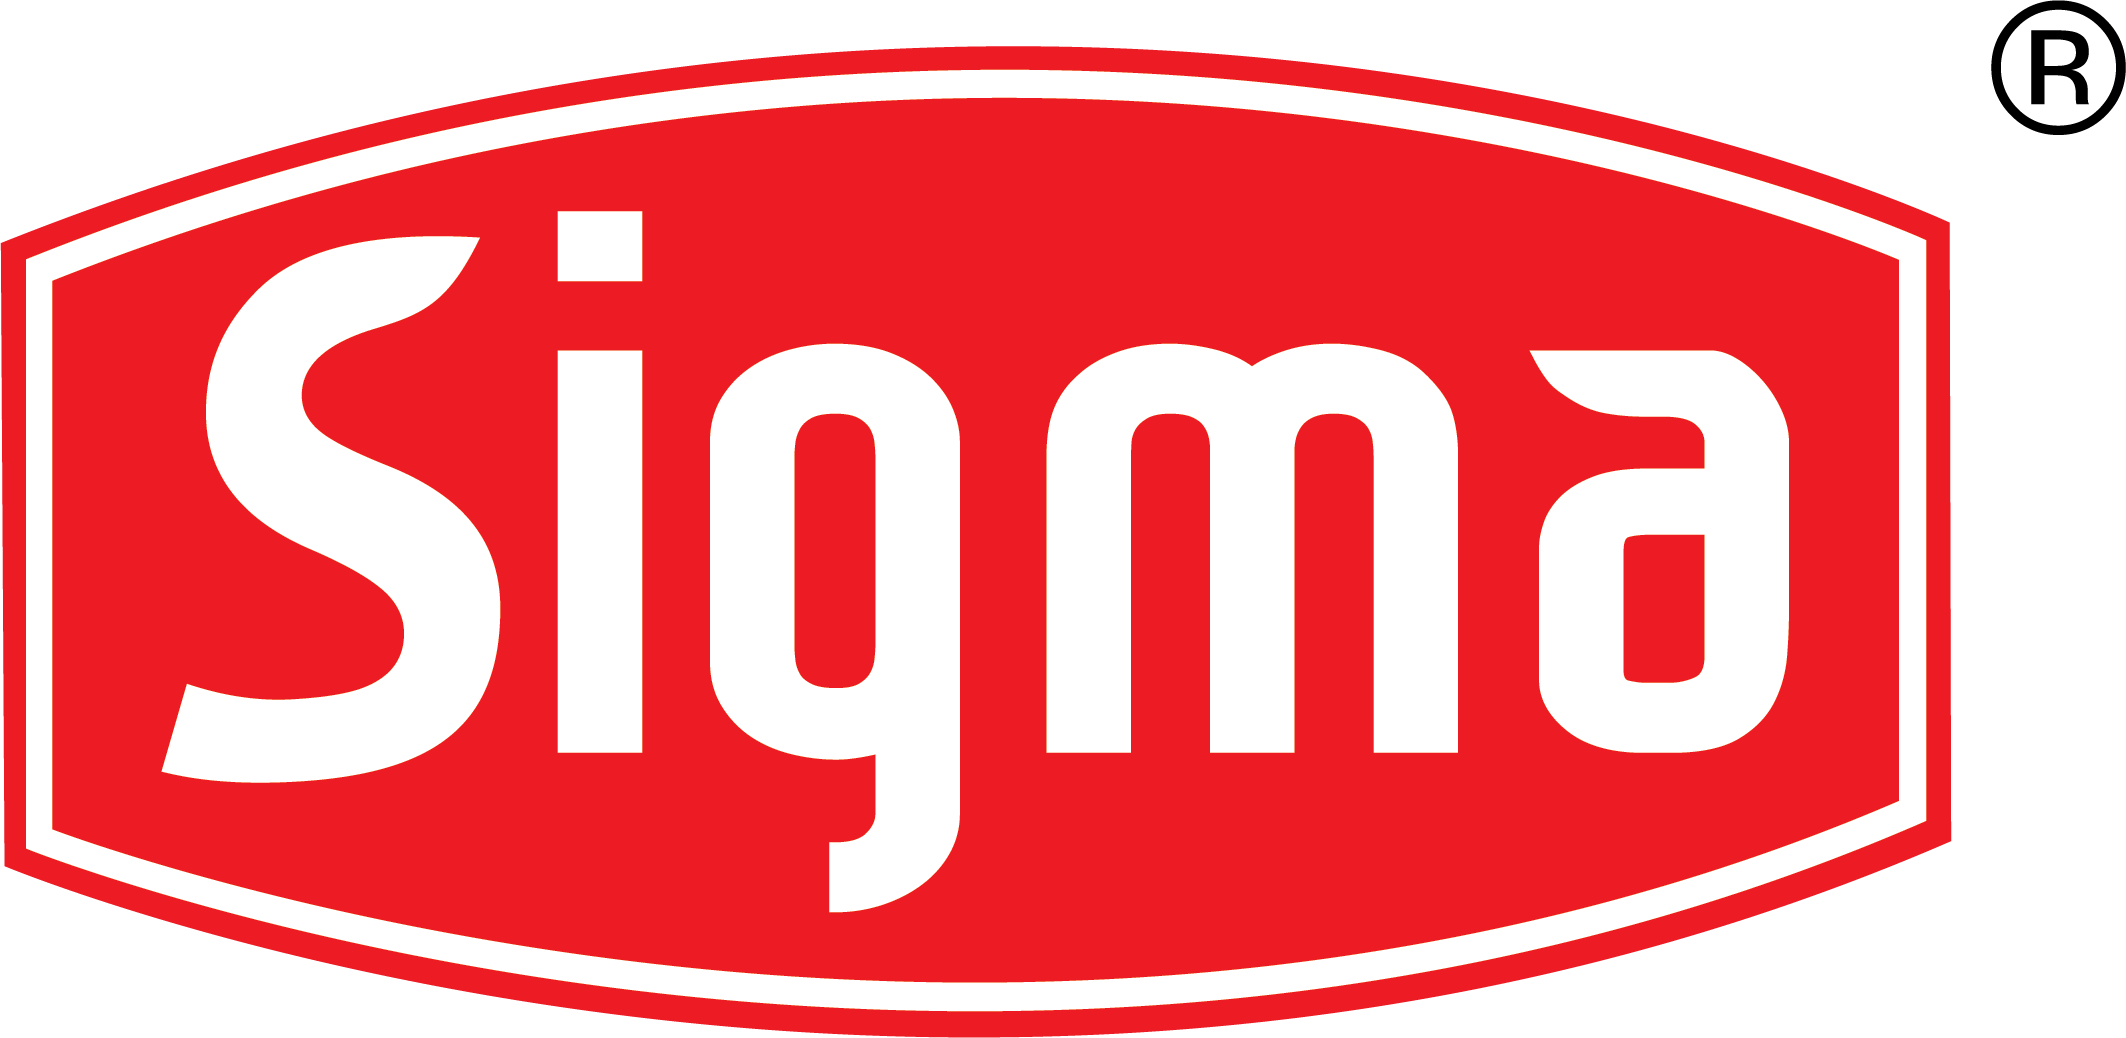  Red oval with white outline containing the word 'Sigma' in a stylized white font.